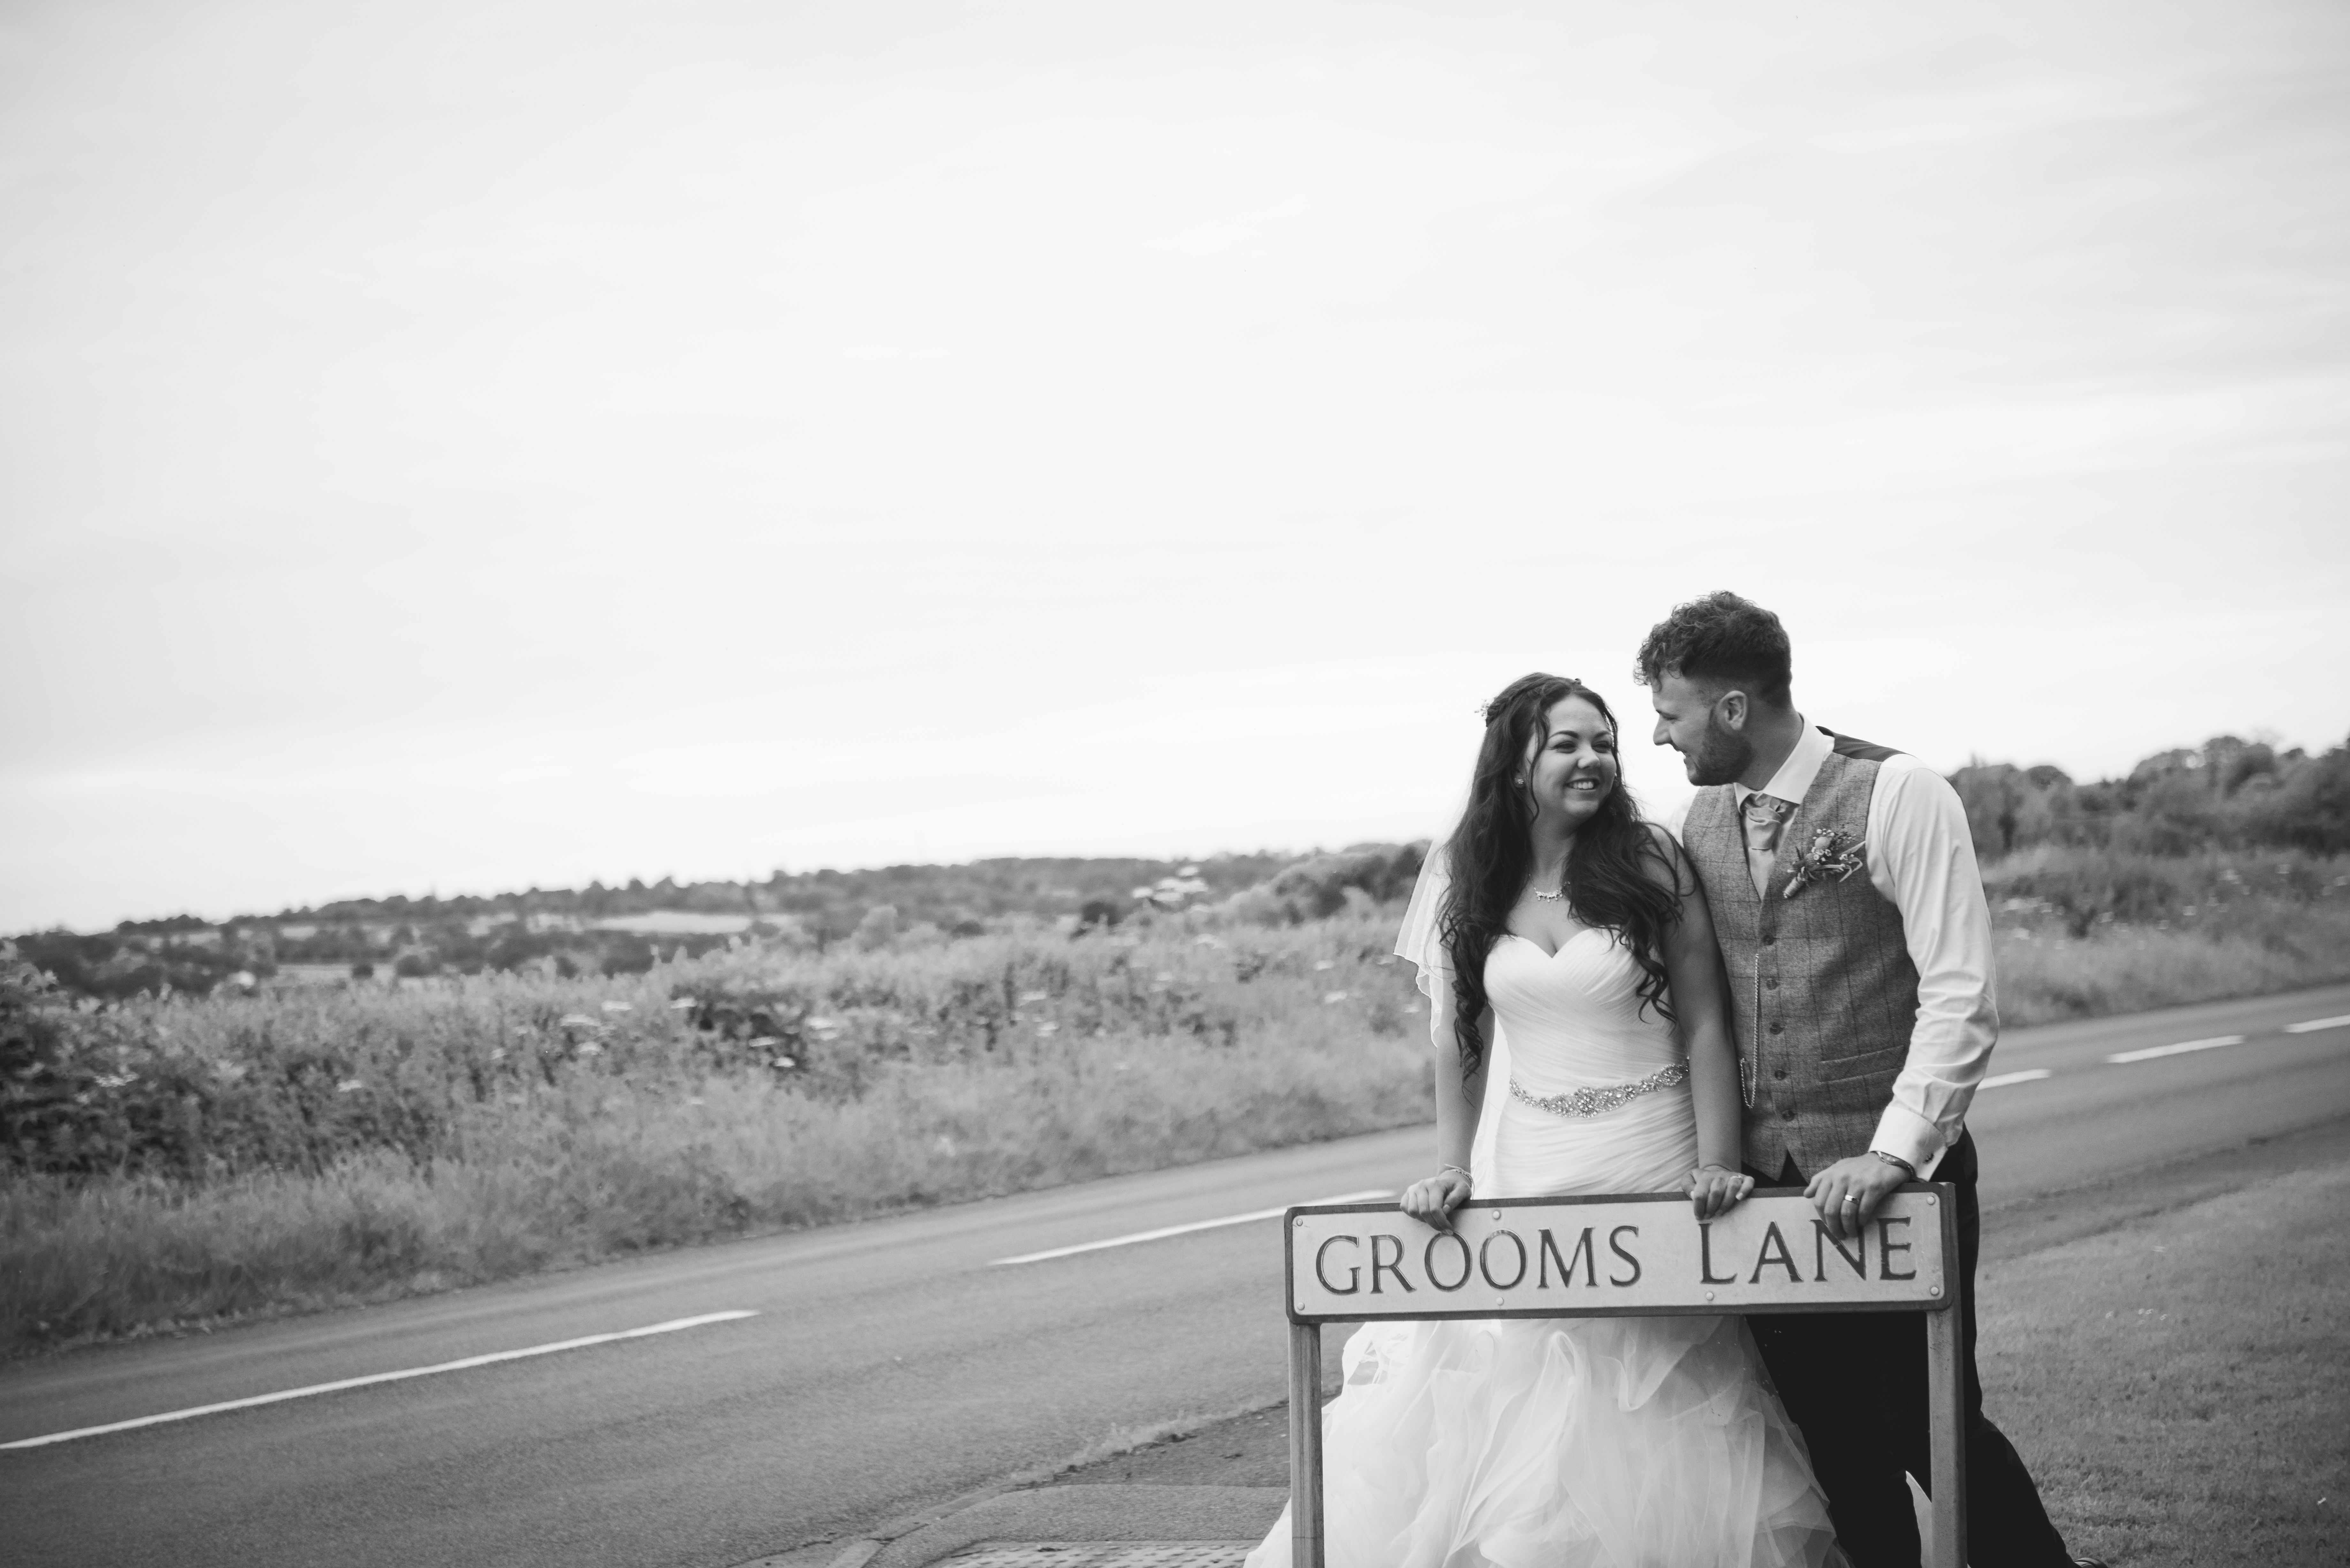 Grooms lane, bride and groom pose at the entrance to their venue